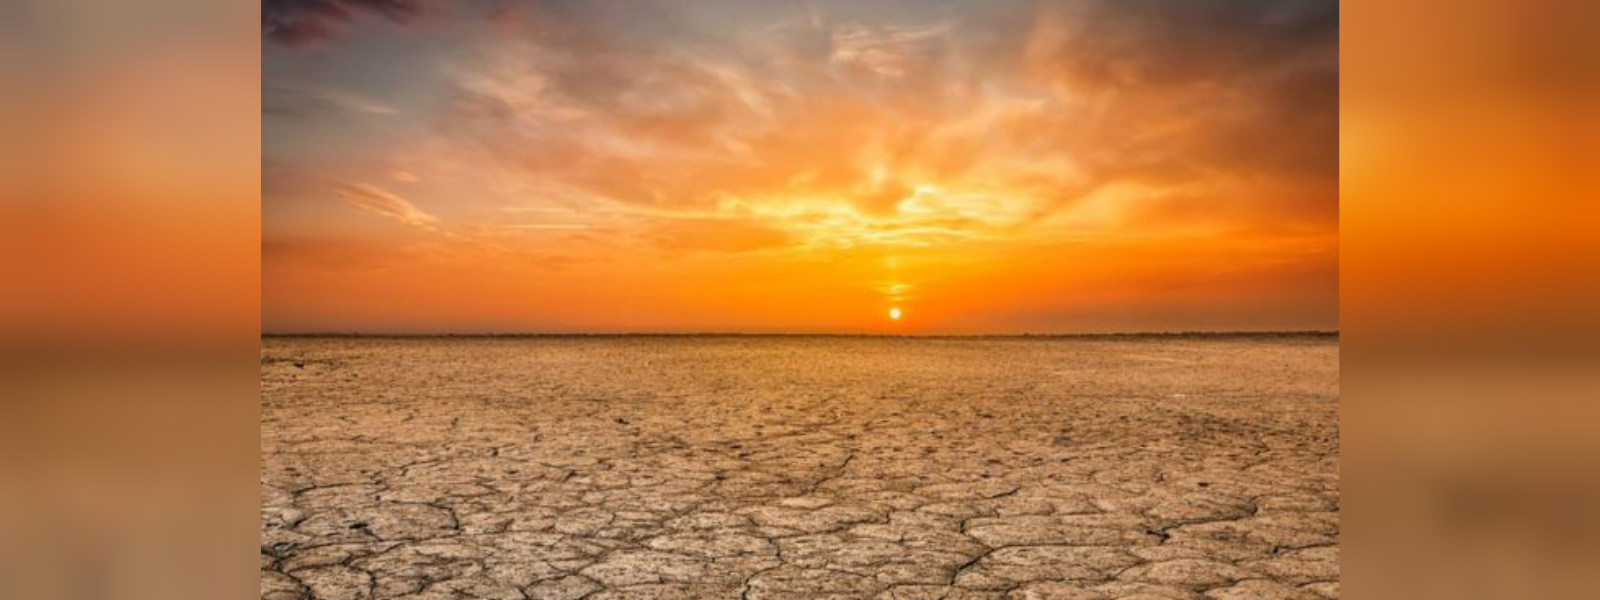 Earth experiences hottest June on record: WMO